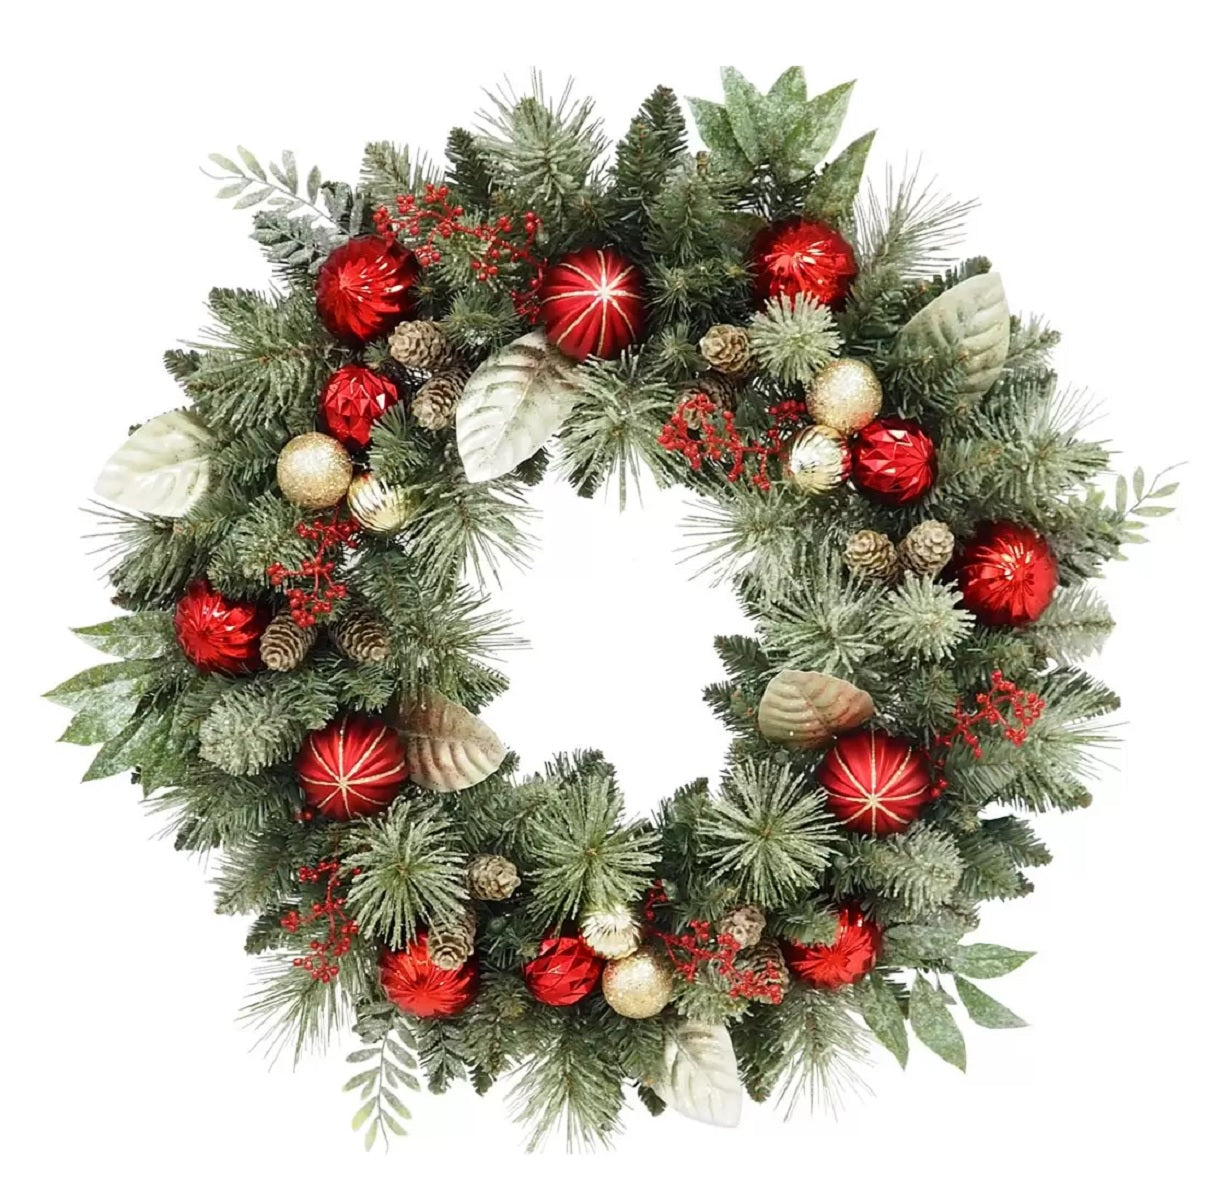 30-inch Pre-Lit Christmas Decorative Wreath with 50 LED Lights Battery Operated